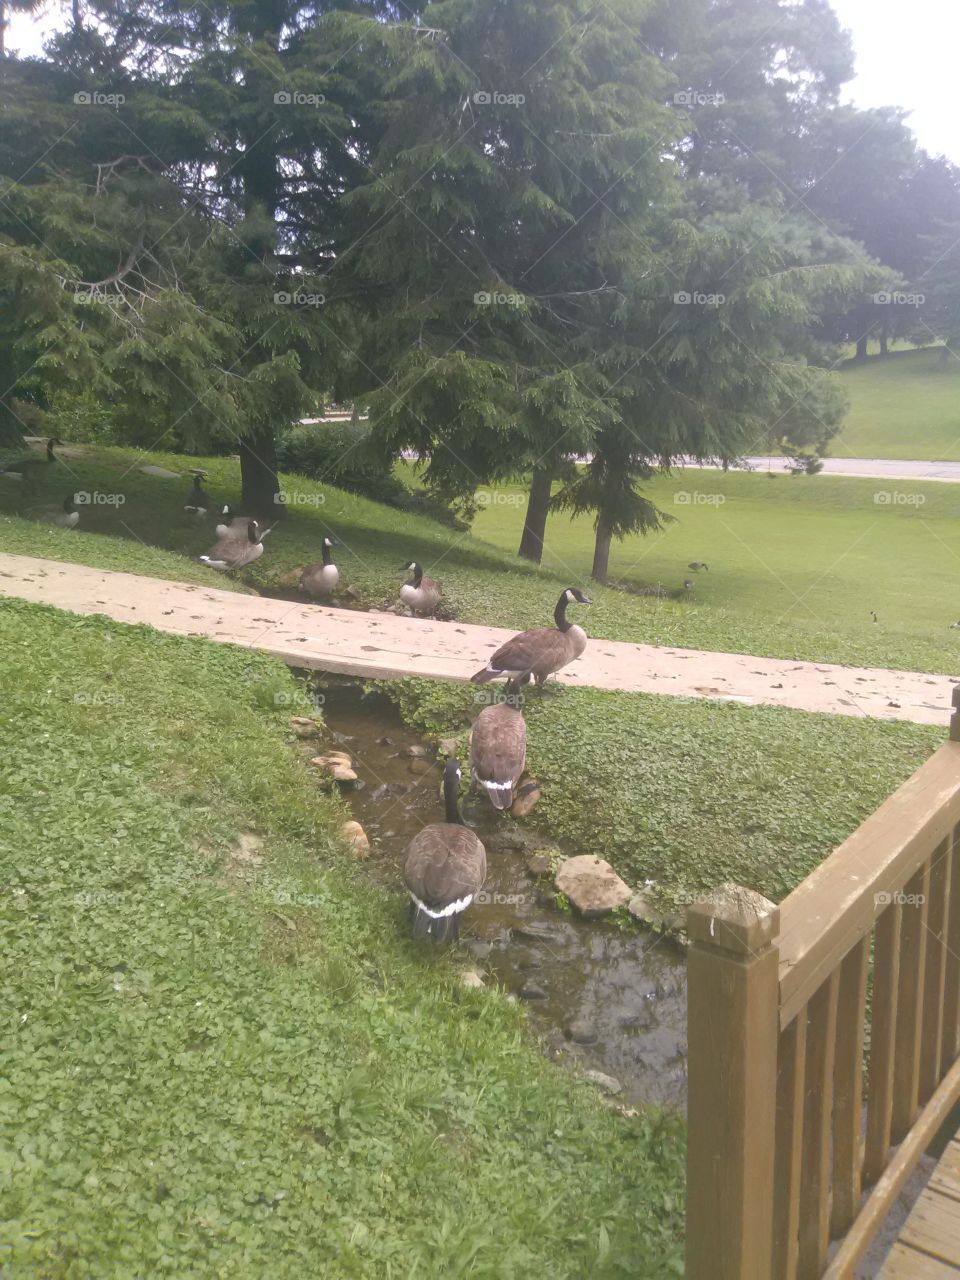 Geese at the Park